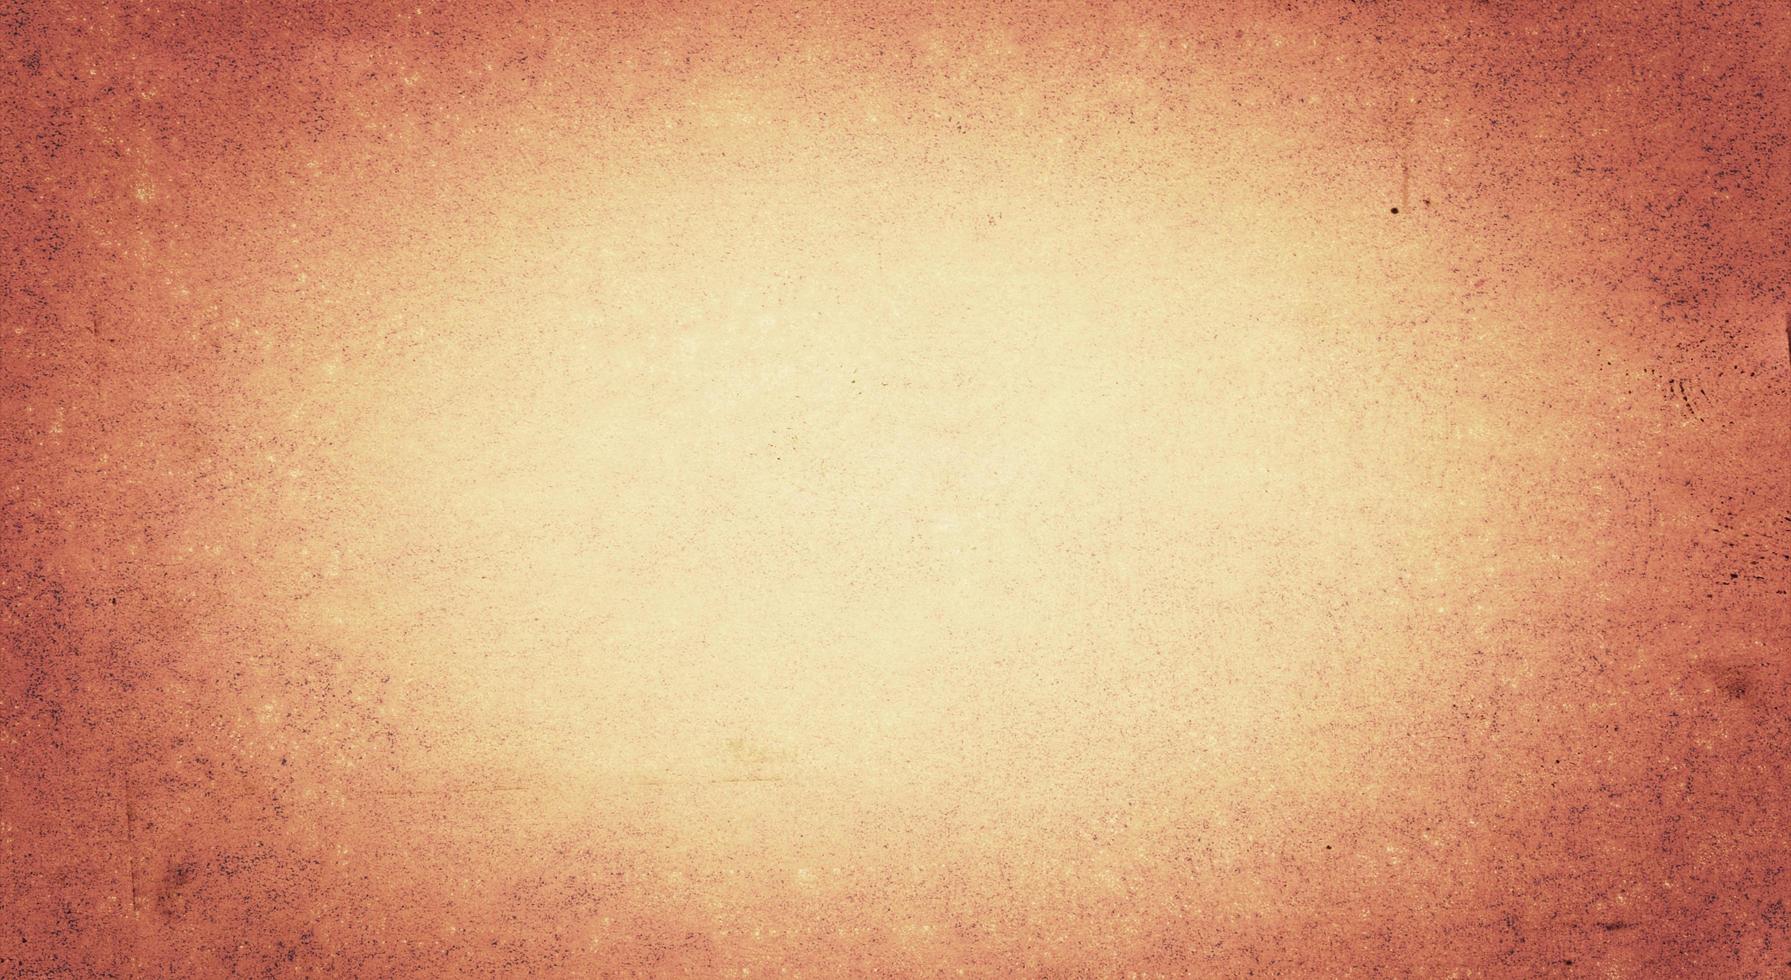 Grunge textured wall background with dark brown vignette border and light center for space text photo